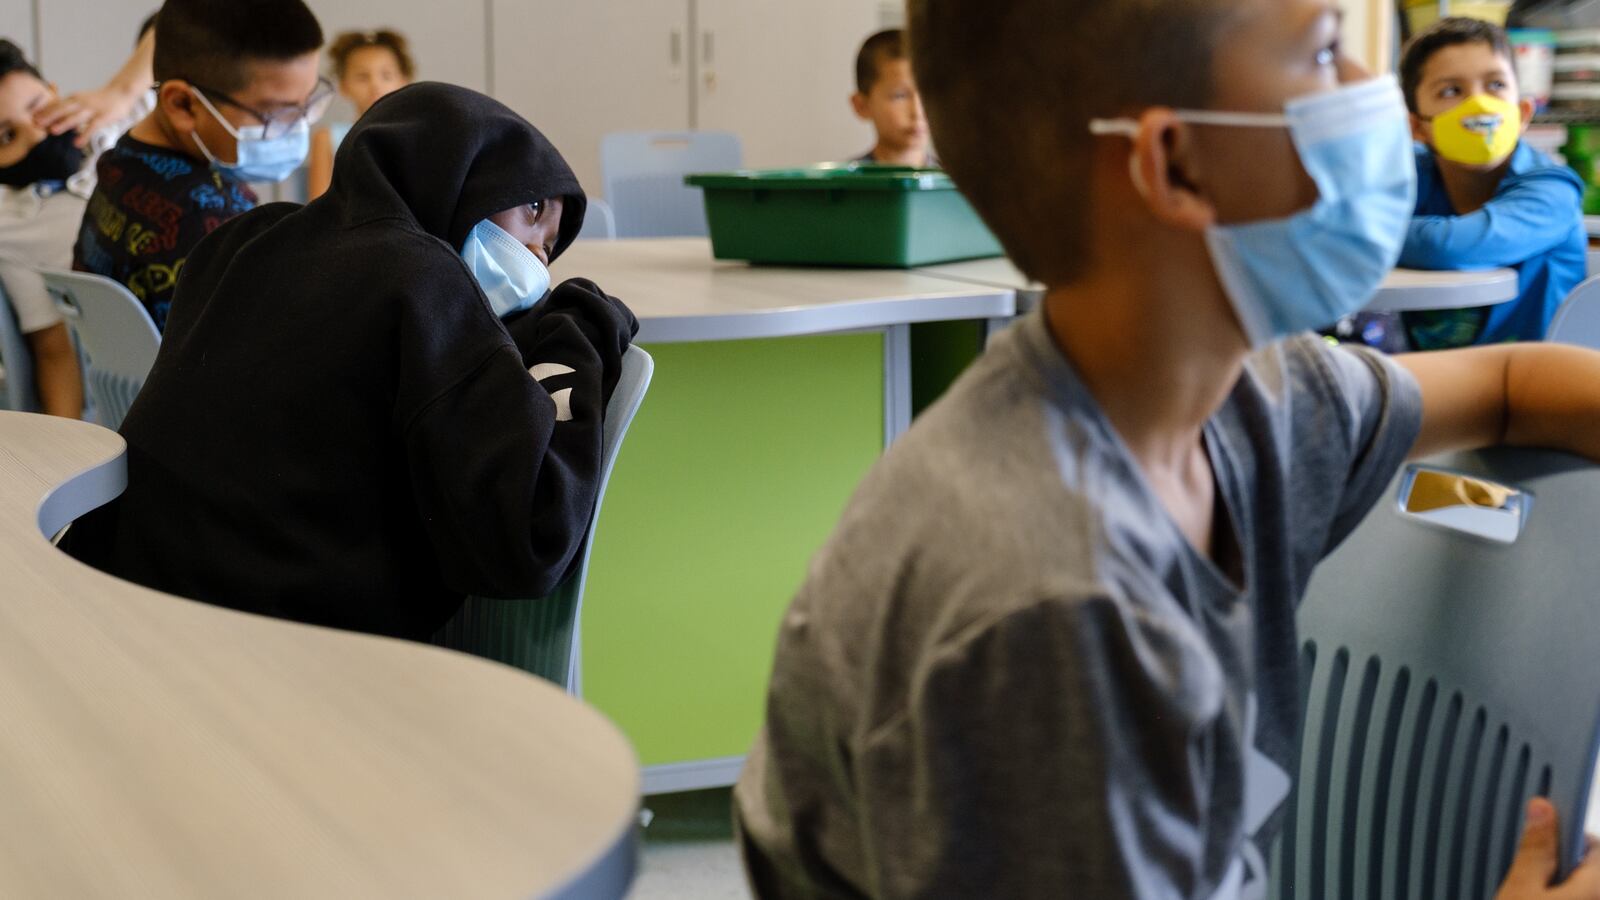 Students in masks listen in the classroom, some slumped over their chairs.